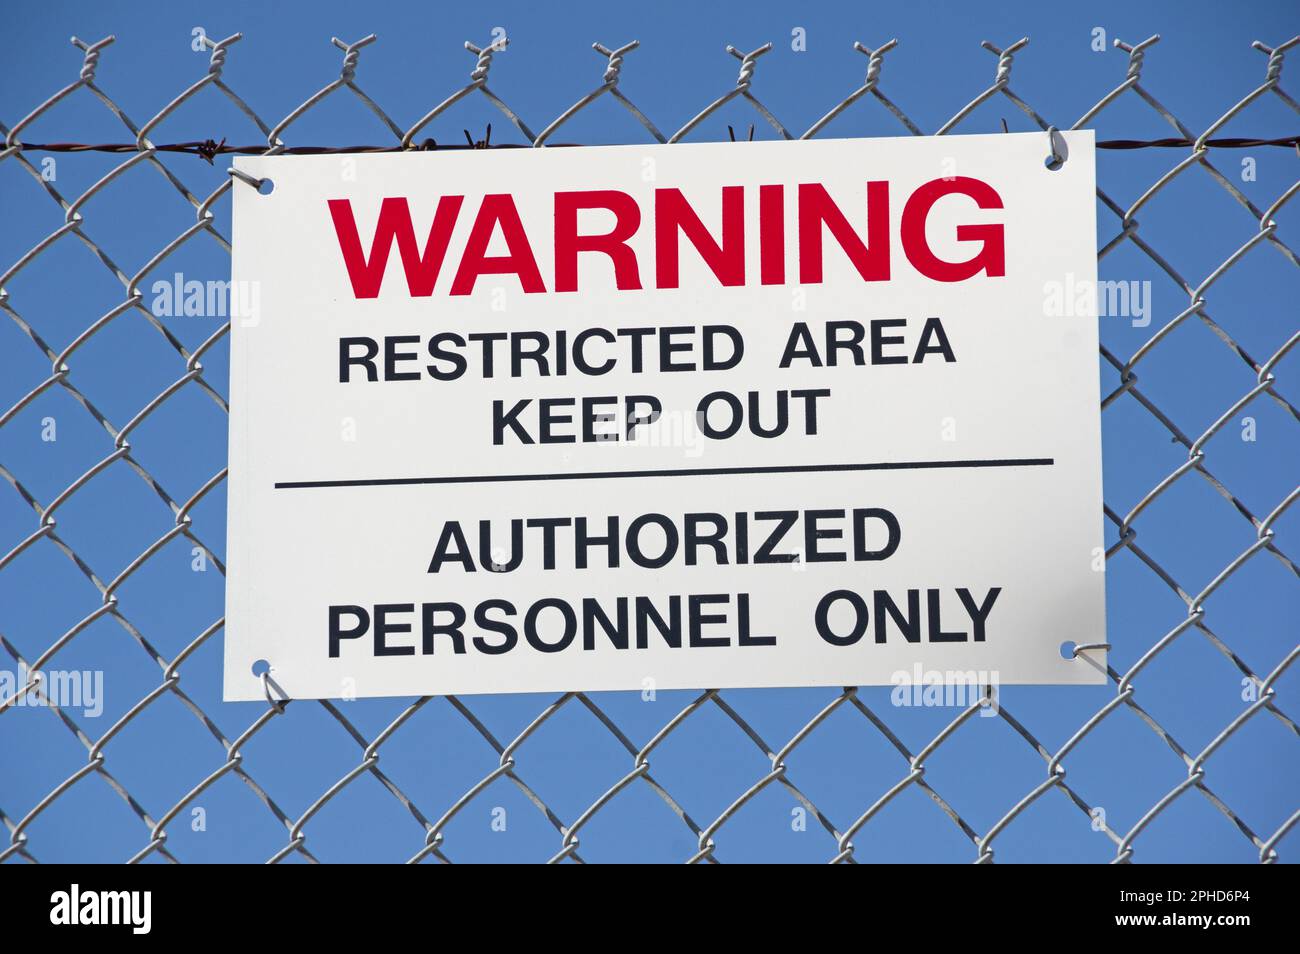 warning restricted area keep out authorized personnel only sign on a wire fence with blue sky background Stock Photo